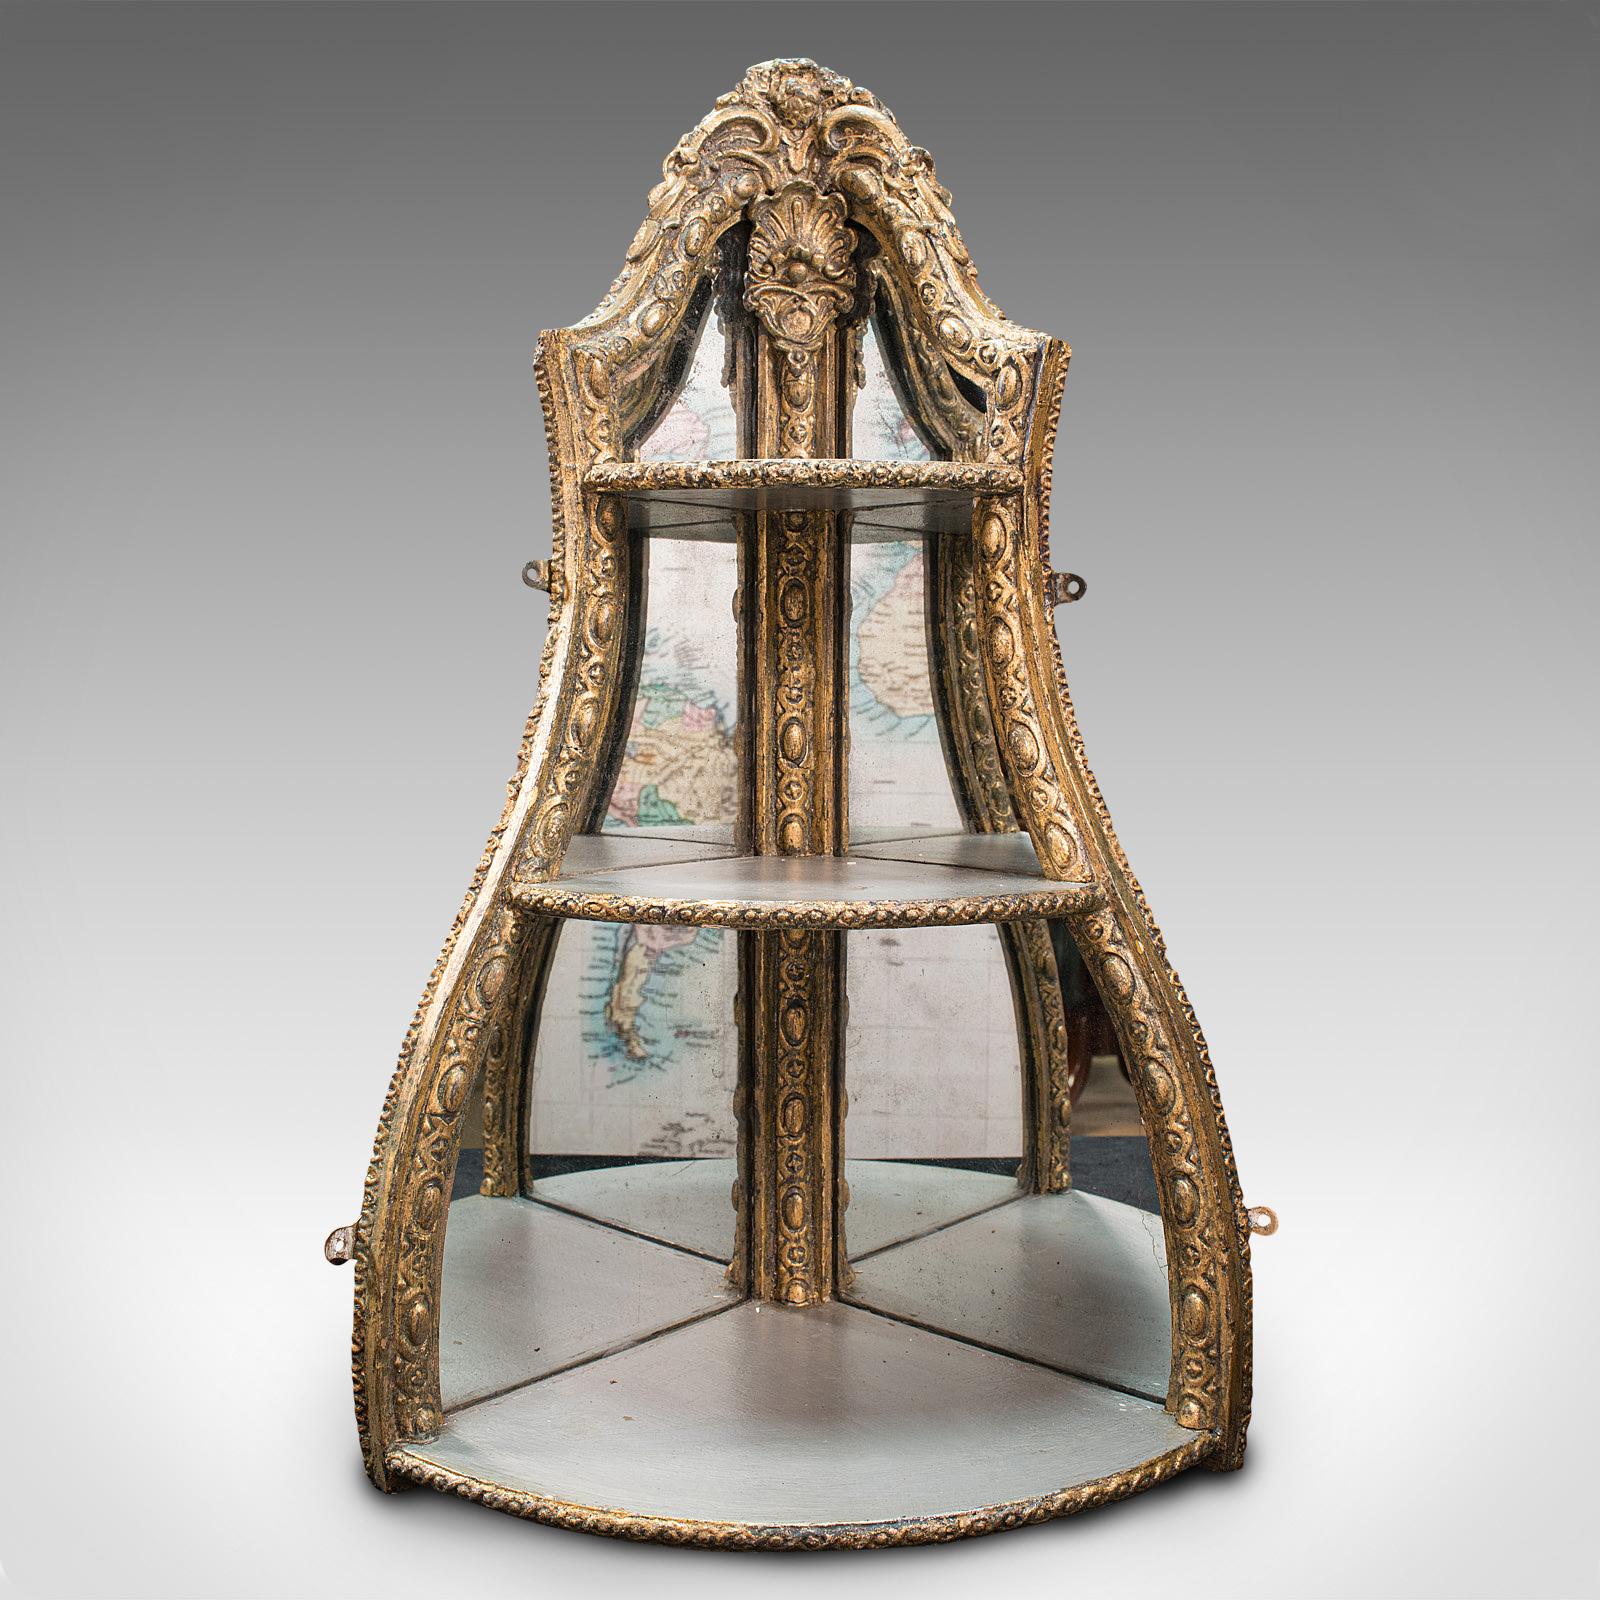 This is an antique mirrored corner shelf. An English, gilt gesso and glass decorative display or candle stand, dating to the Regency period, circa 1820.

Eye-catching form and finish to this appealing example of Regency craftsmanship
Displaying a